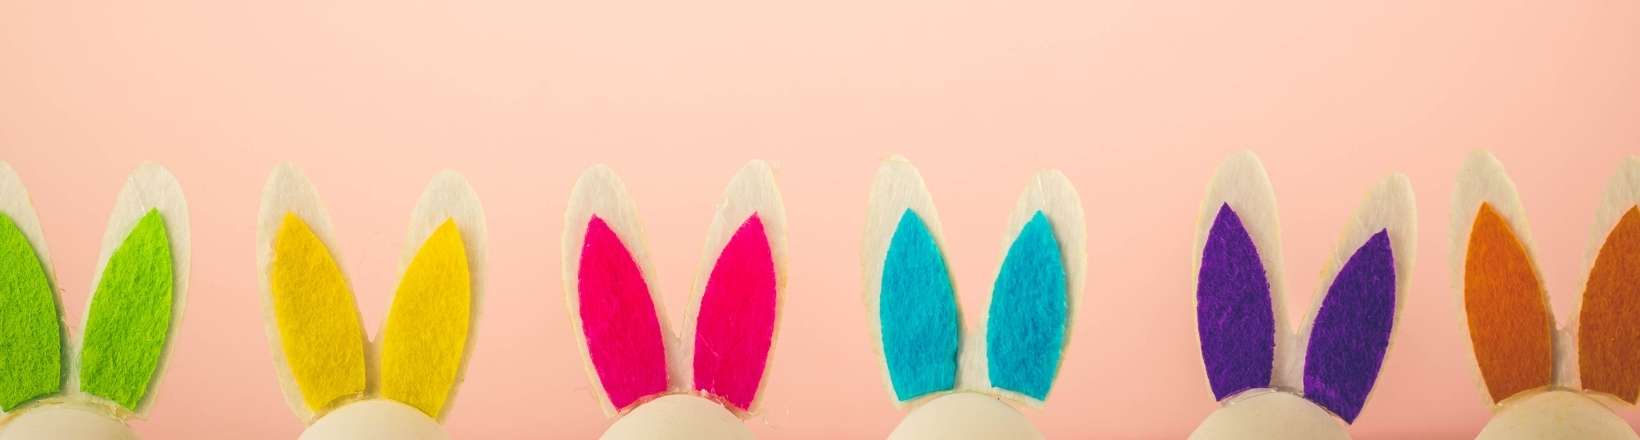 The best marketing ideas to make the most of Easter